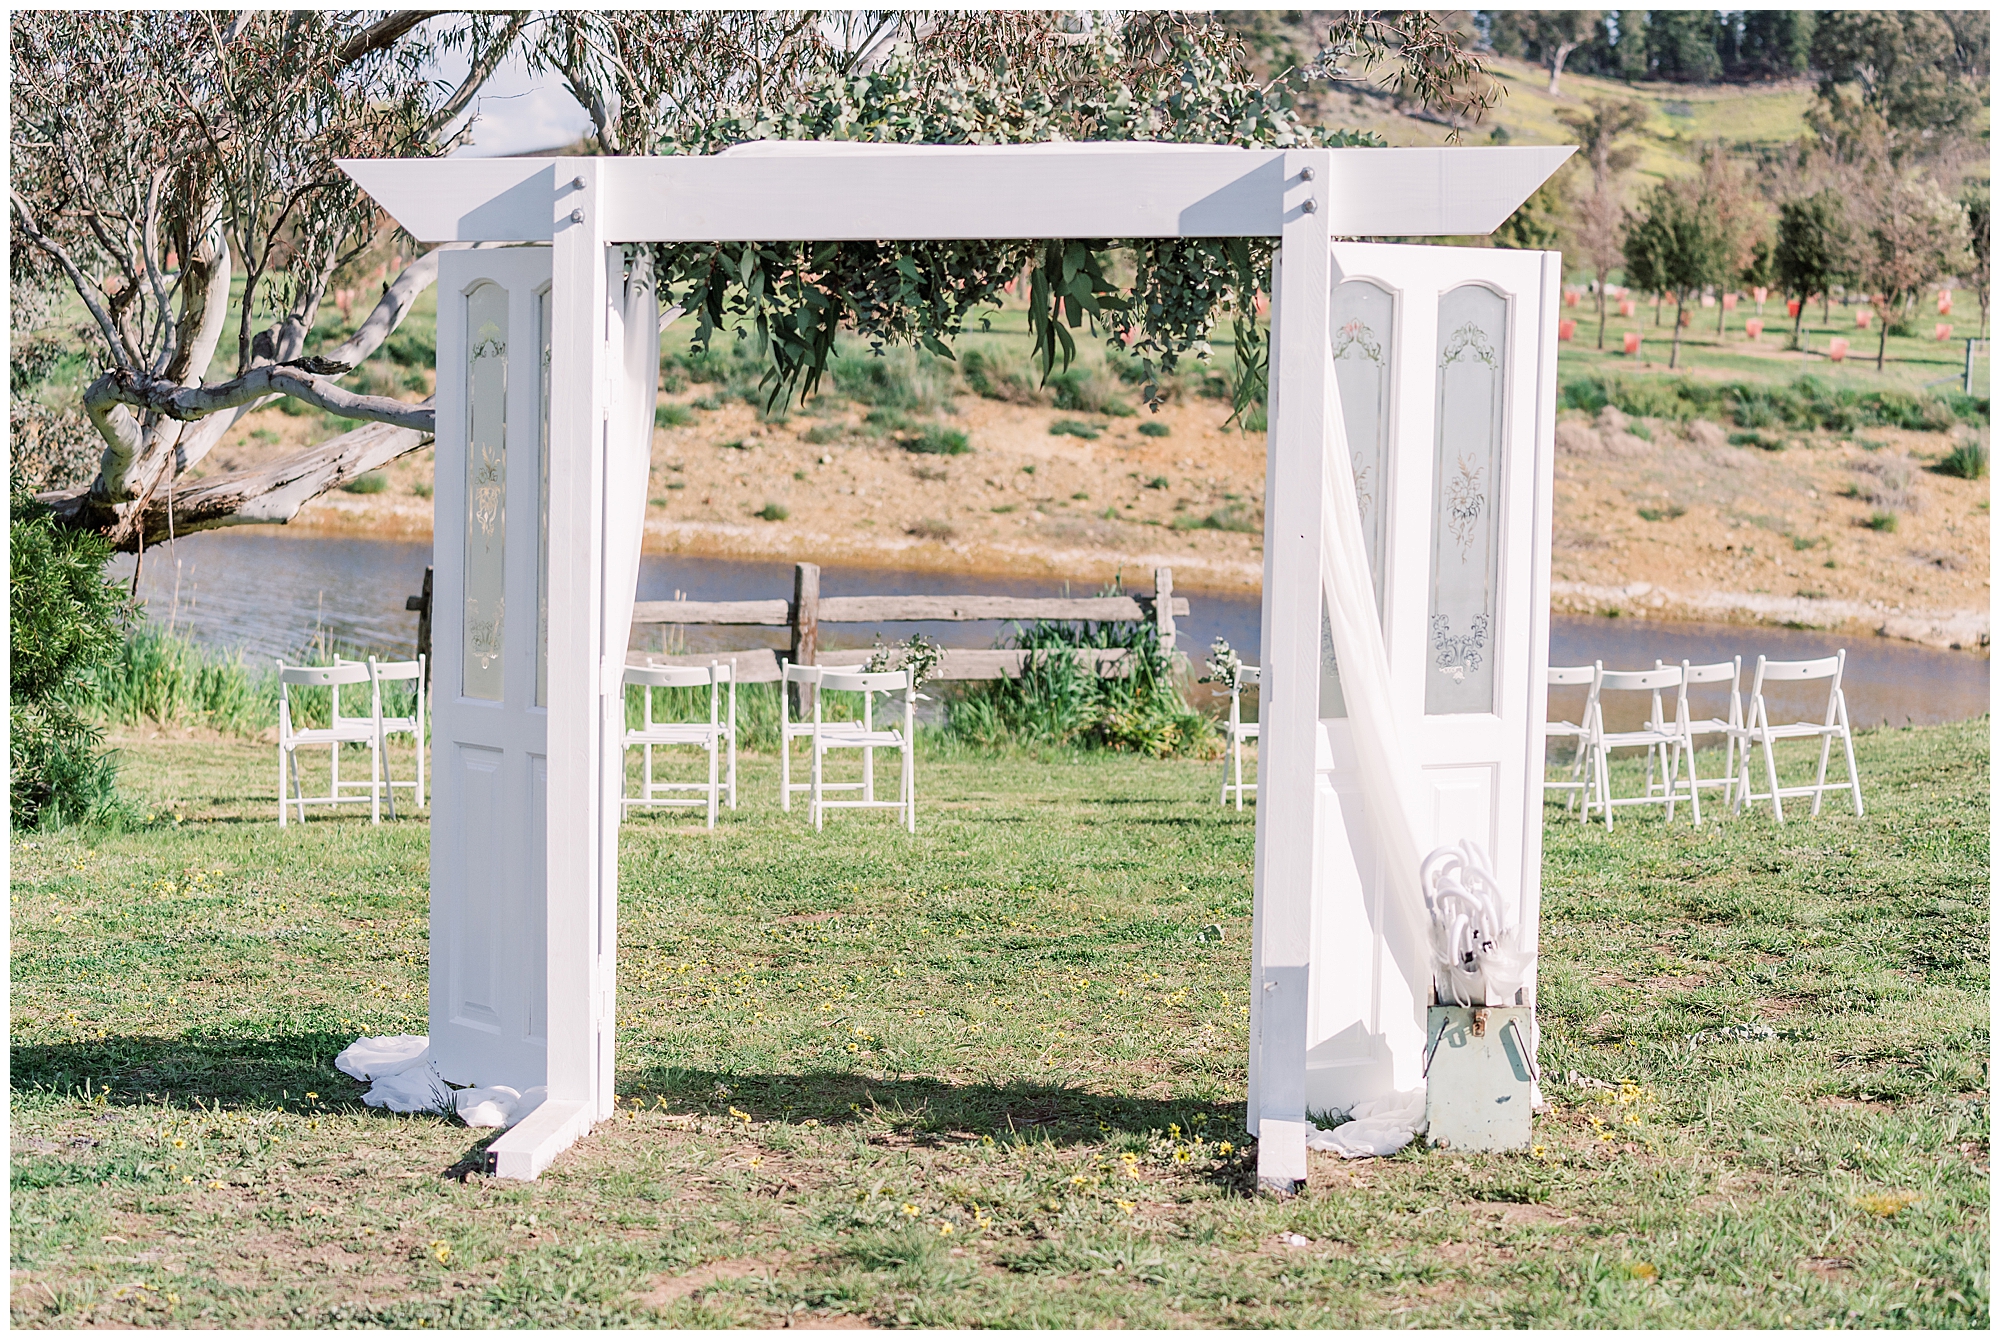 Ceremony setup at the Truffle farm in Canberra